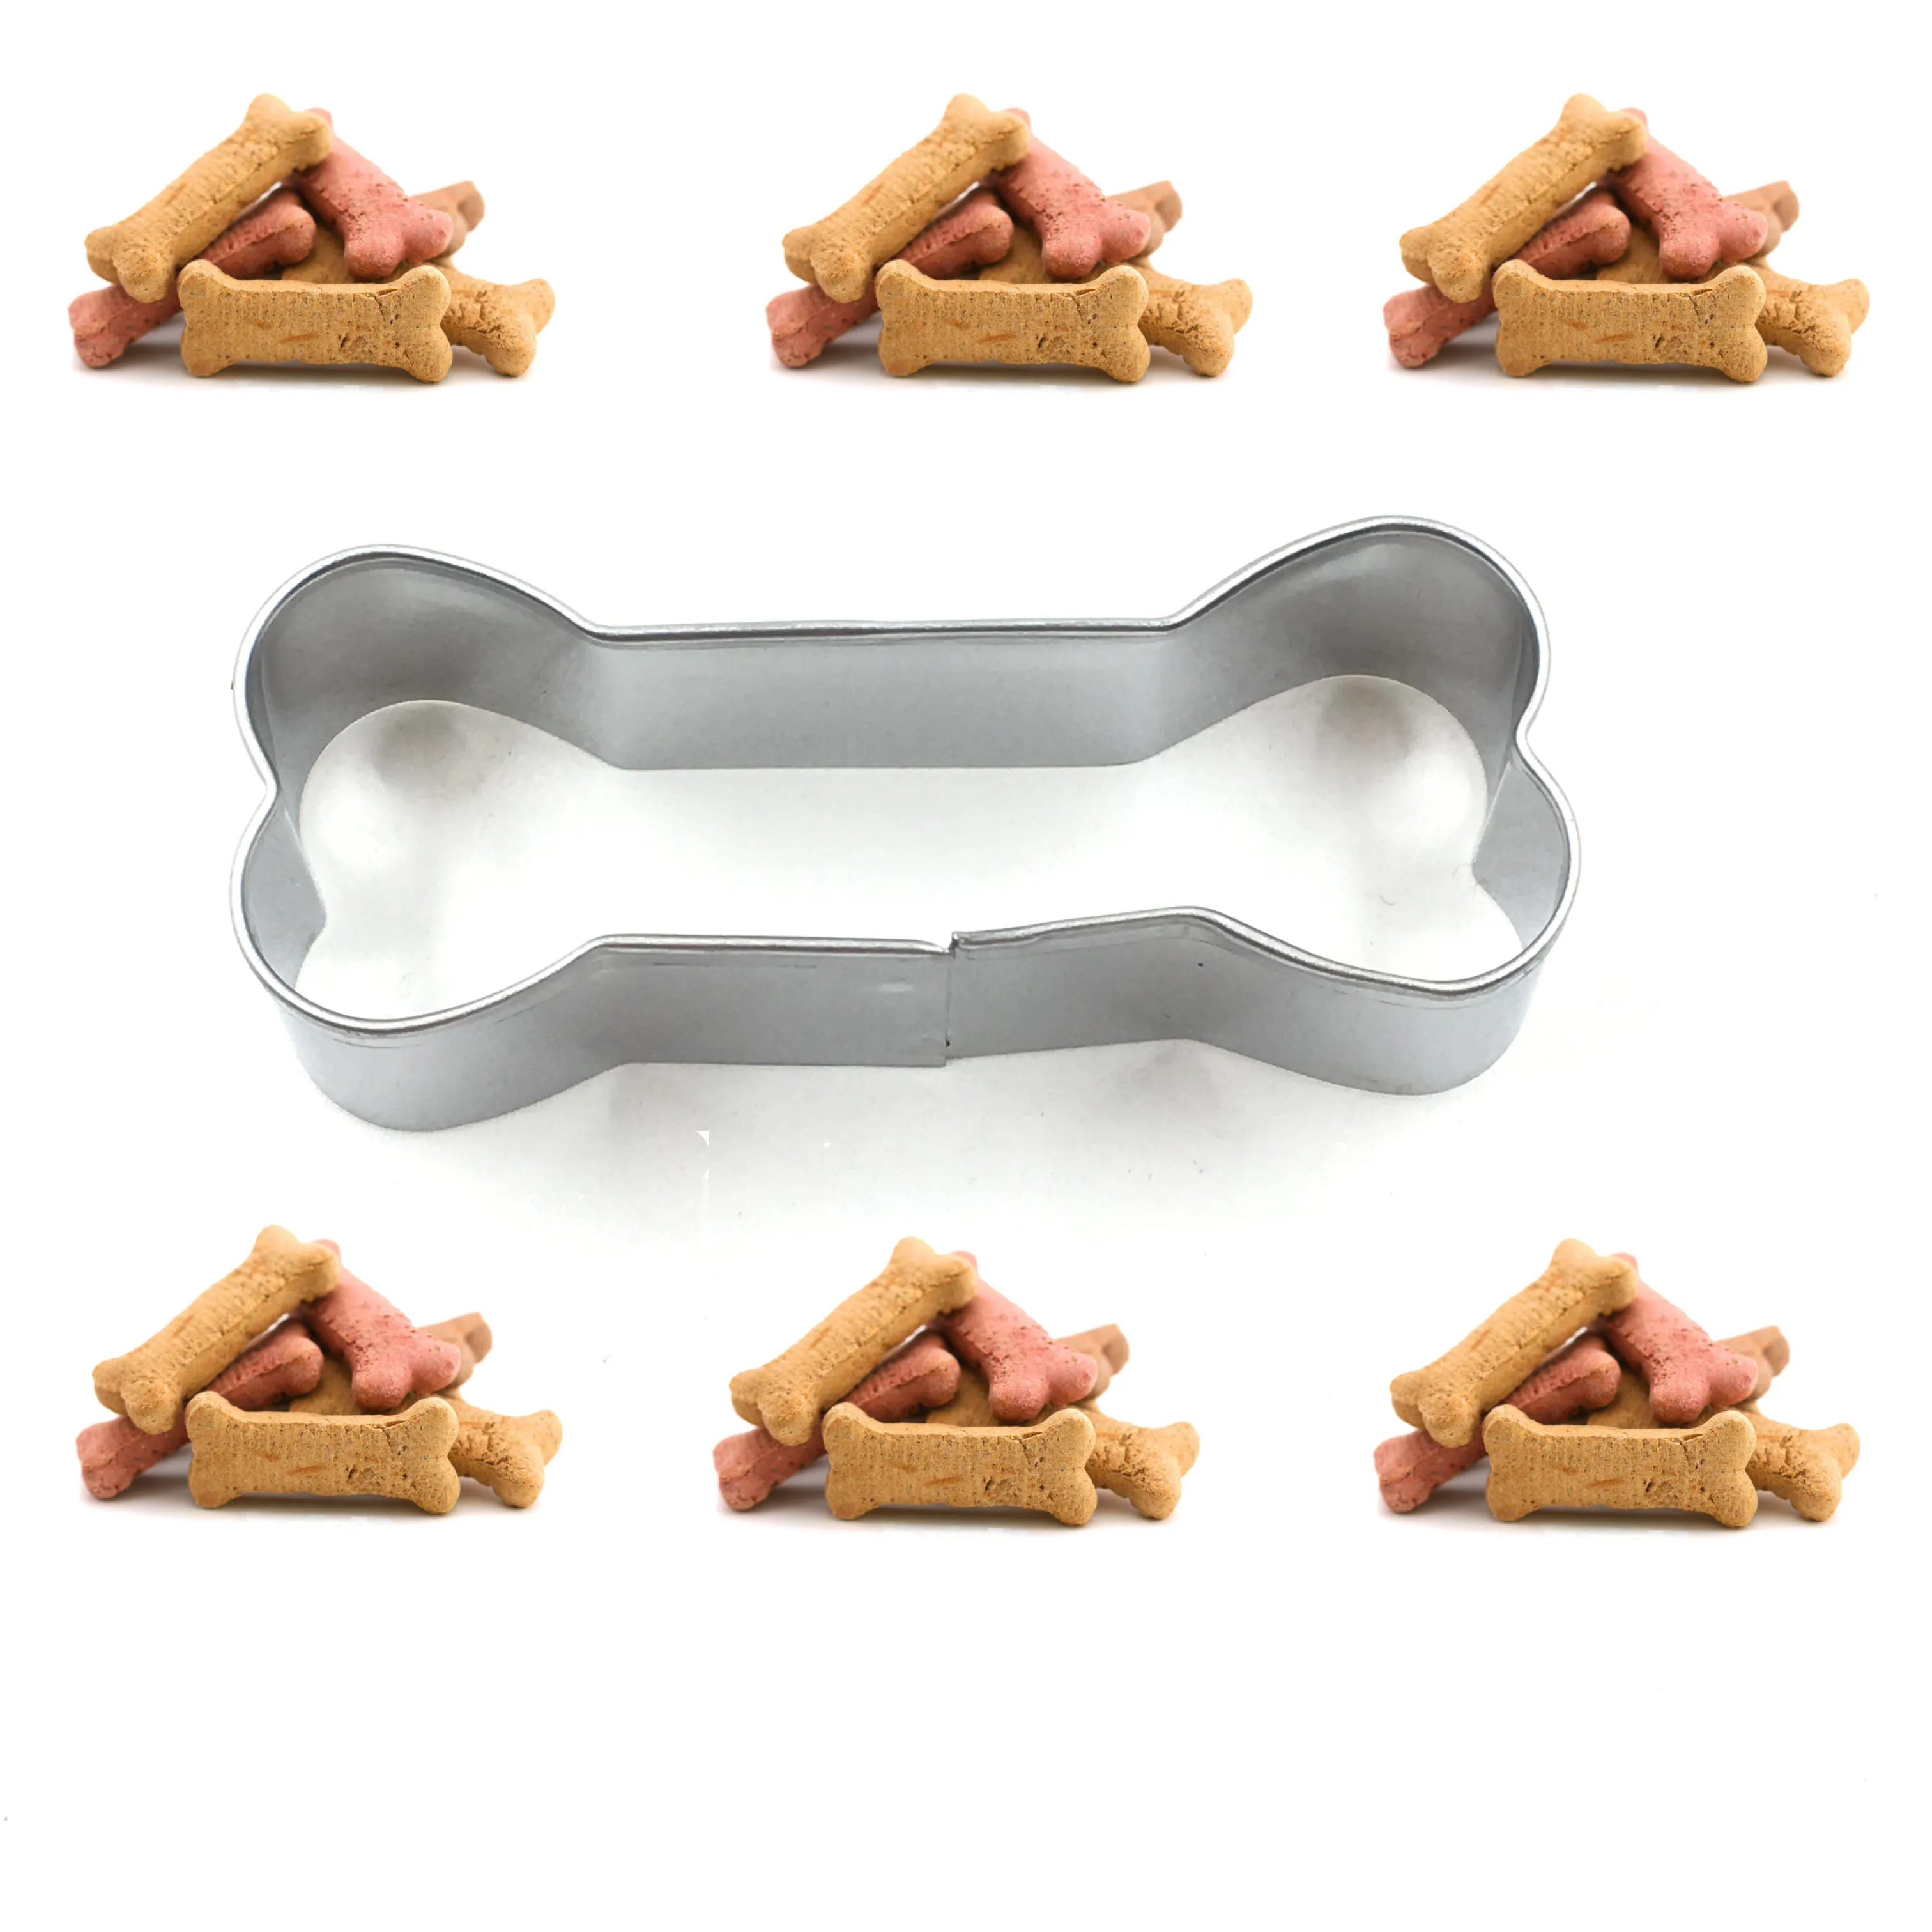 where to buy cookie cutters